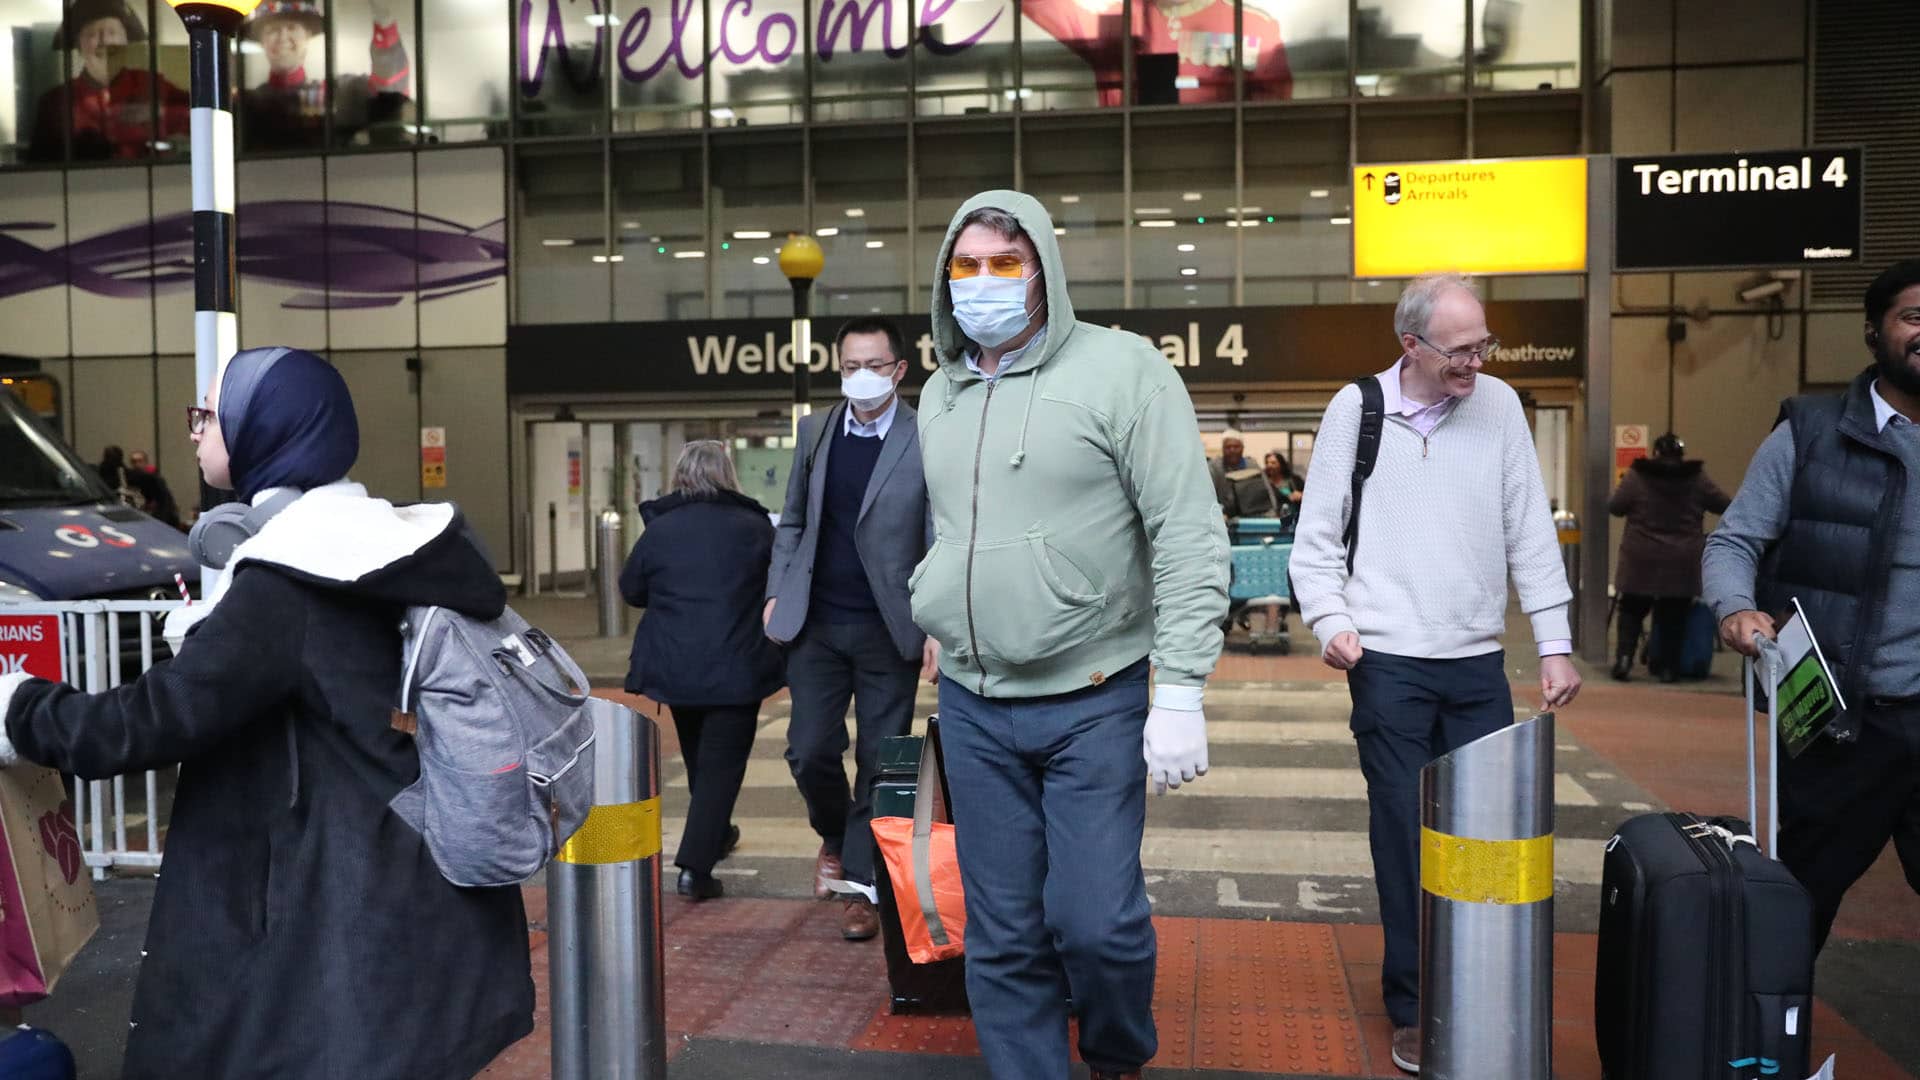 Passengers outside of Terminal 4 at London's Heathrow Airport in January as government officials meet to discuss the threat to the U.K. from coronavirus.